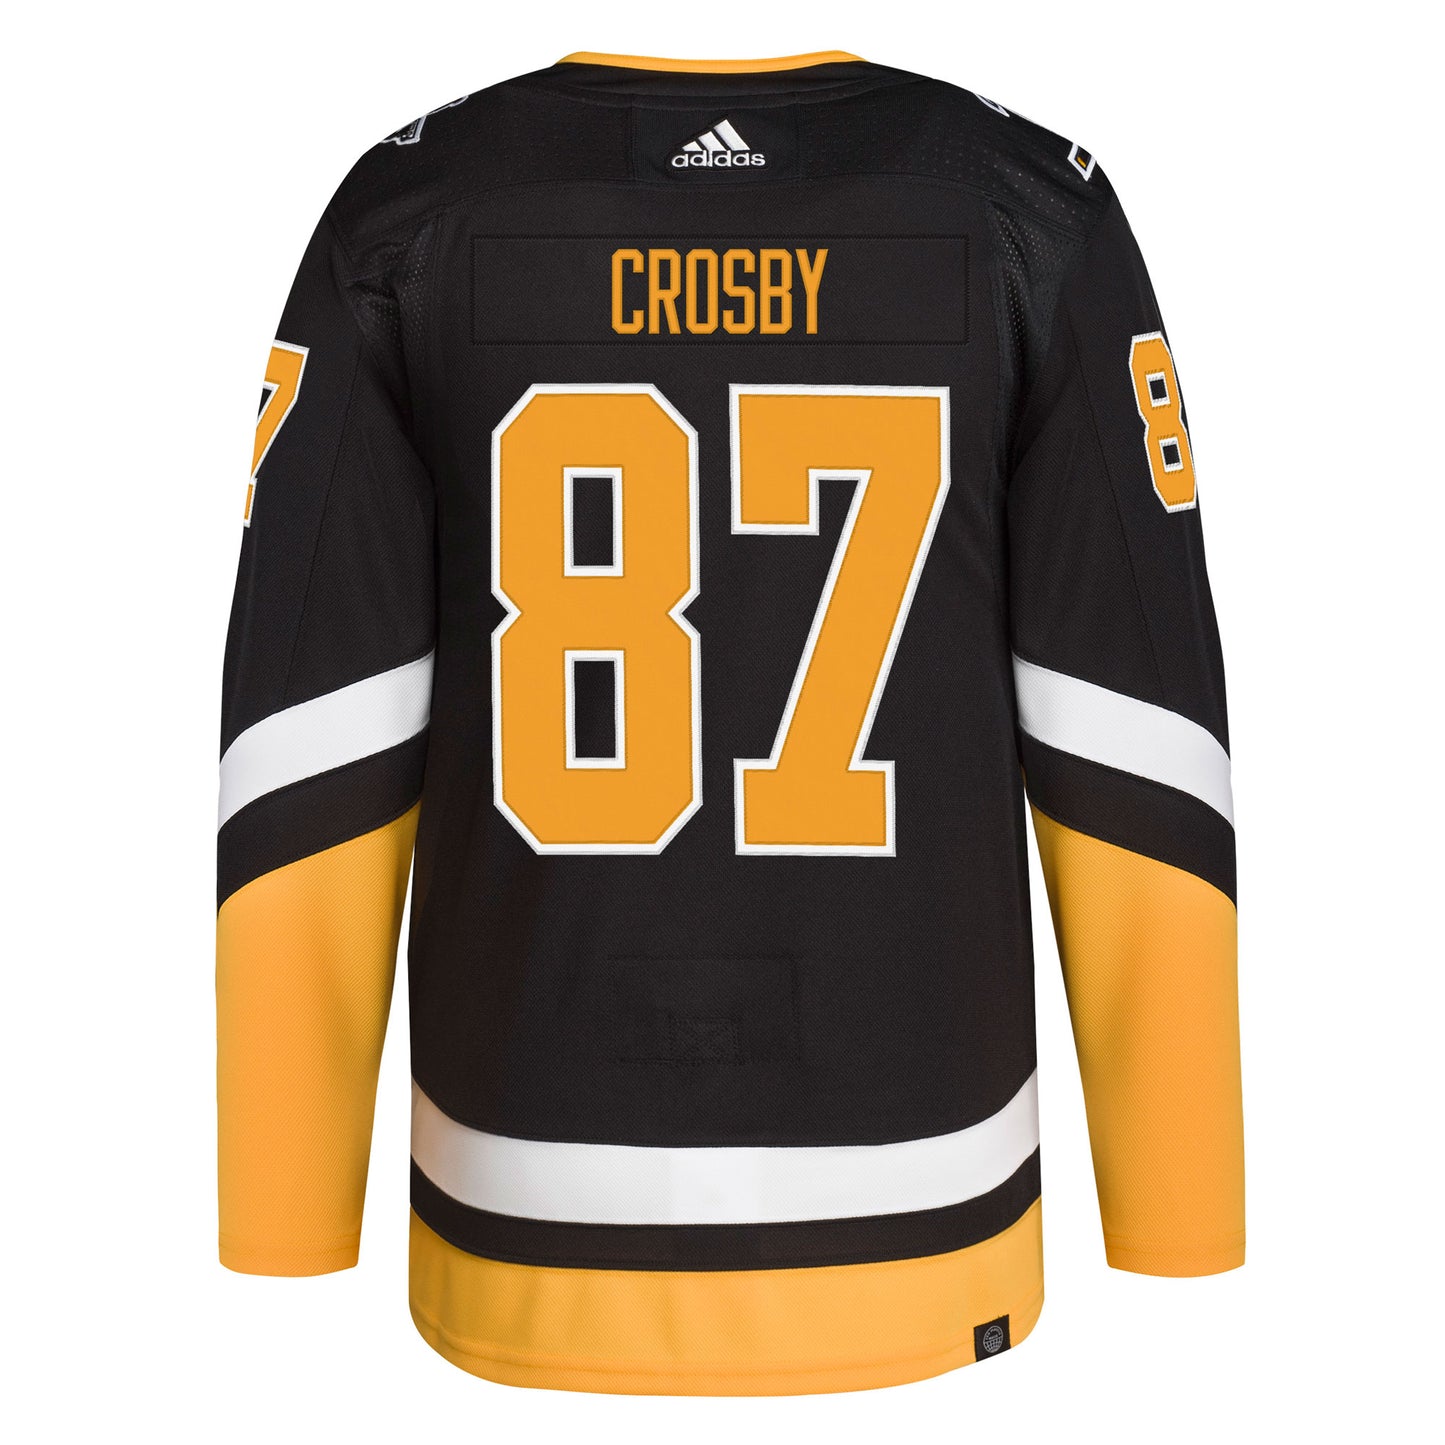 Sidney Crosby Pittsburgh Penguins adidas 2021/22 Alternate Primegreen Authentic Pro Player Jersey - Black